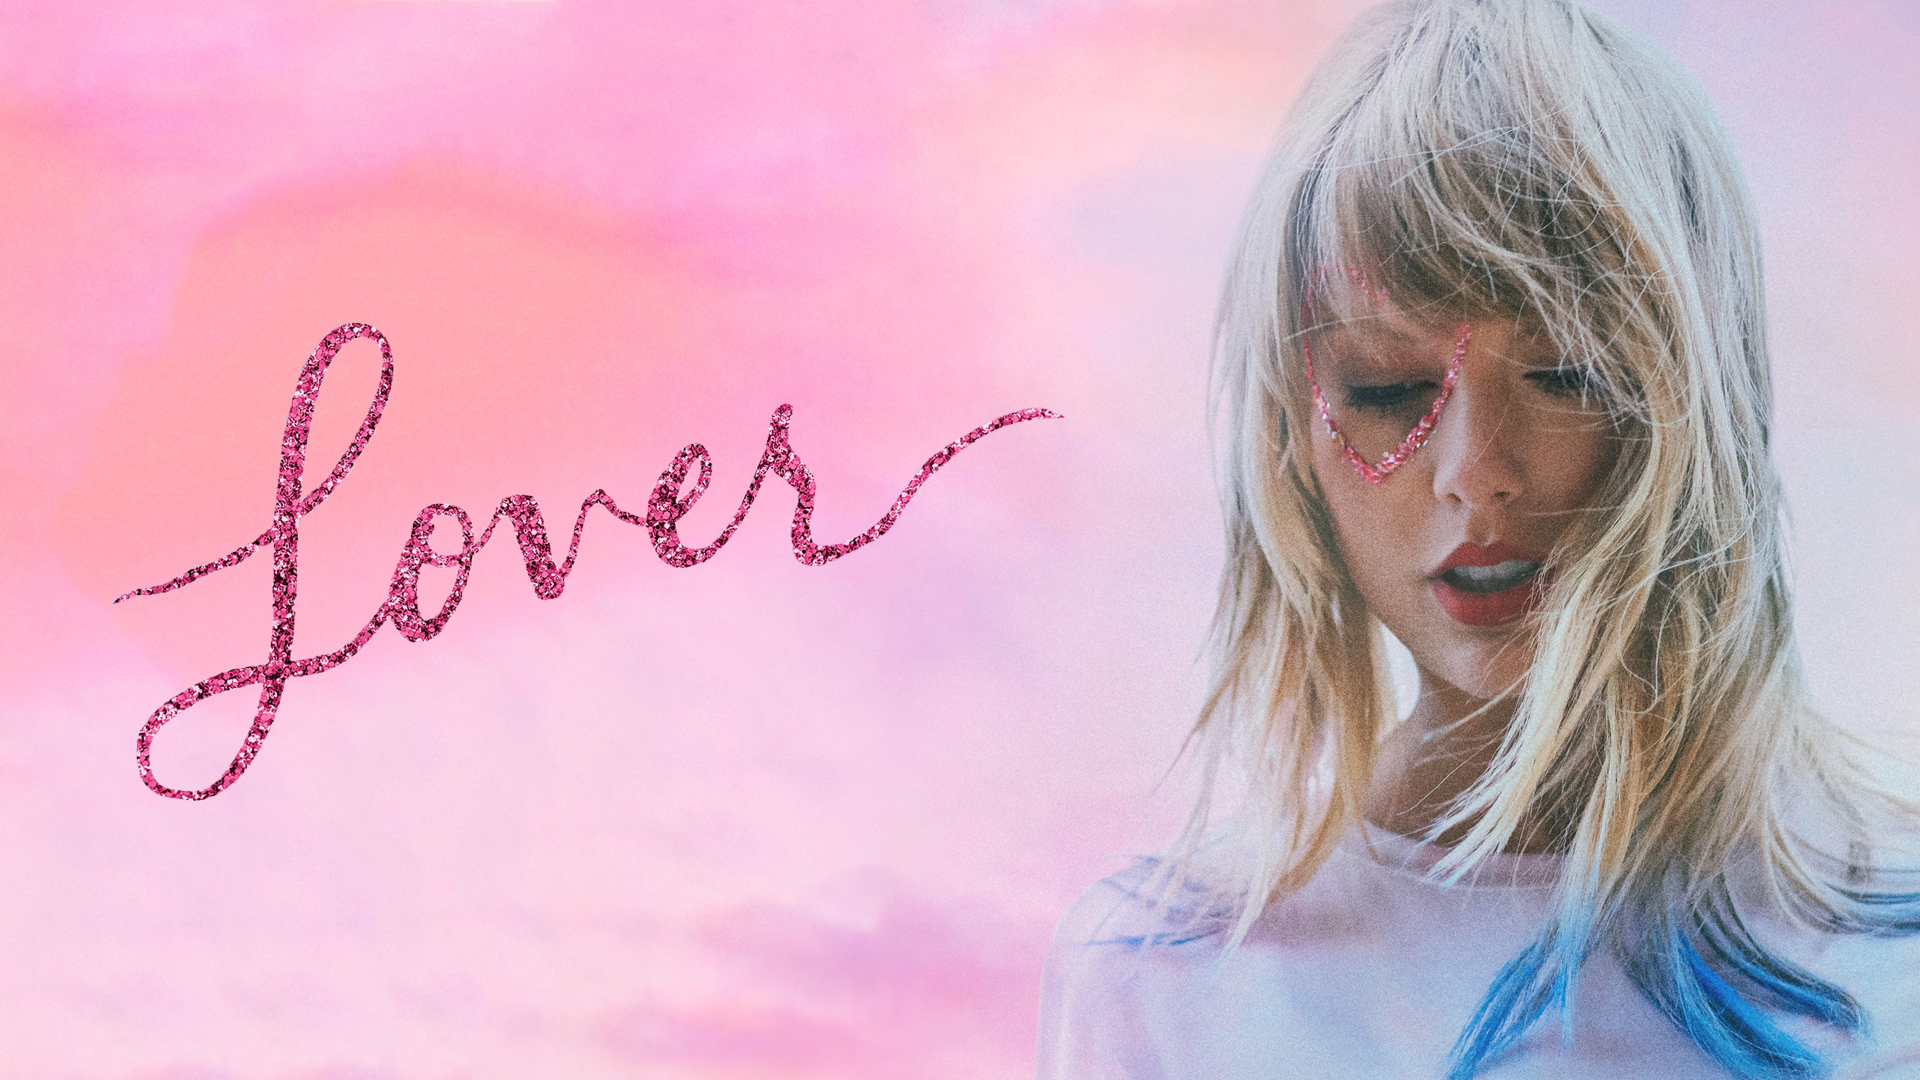 Lover Taylor Swift Aesthetic Wallpapers Wallpaper Cave